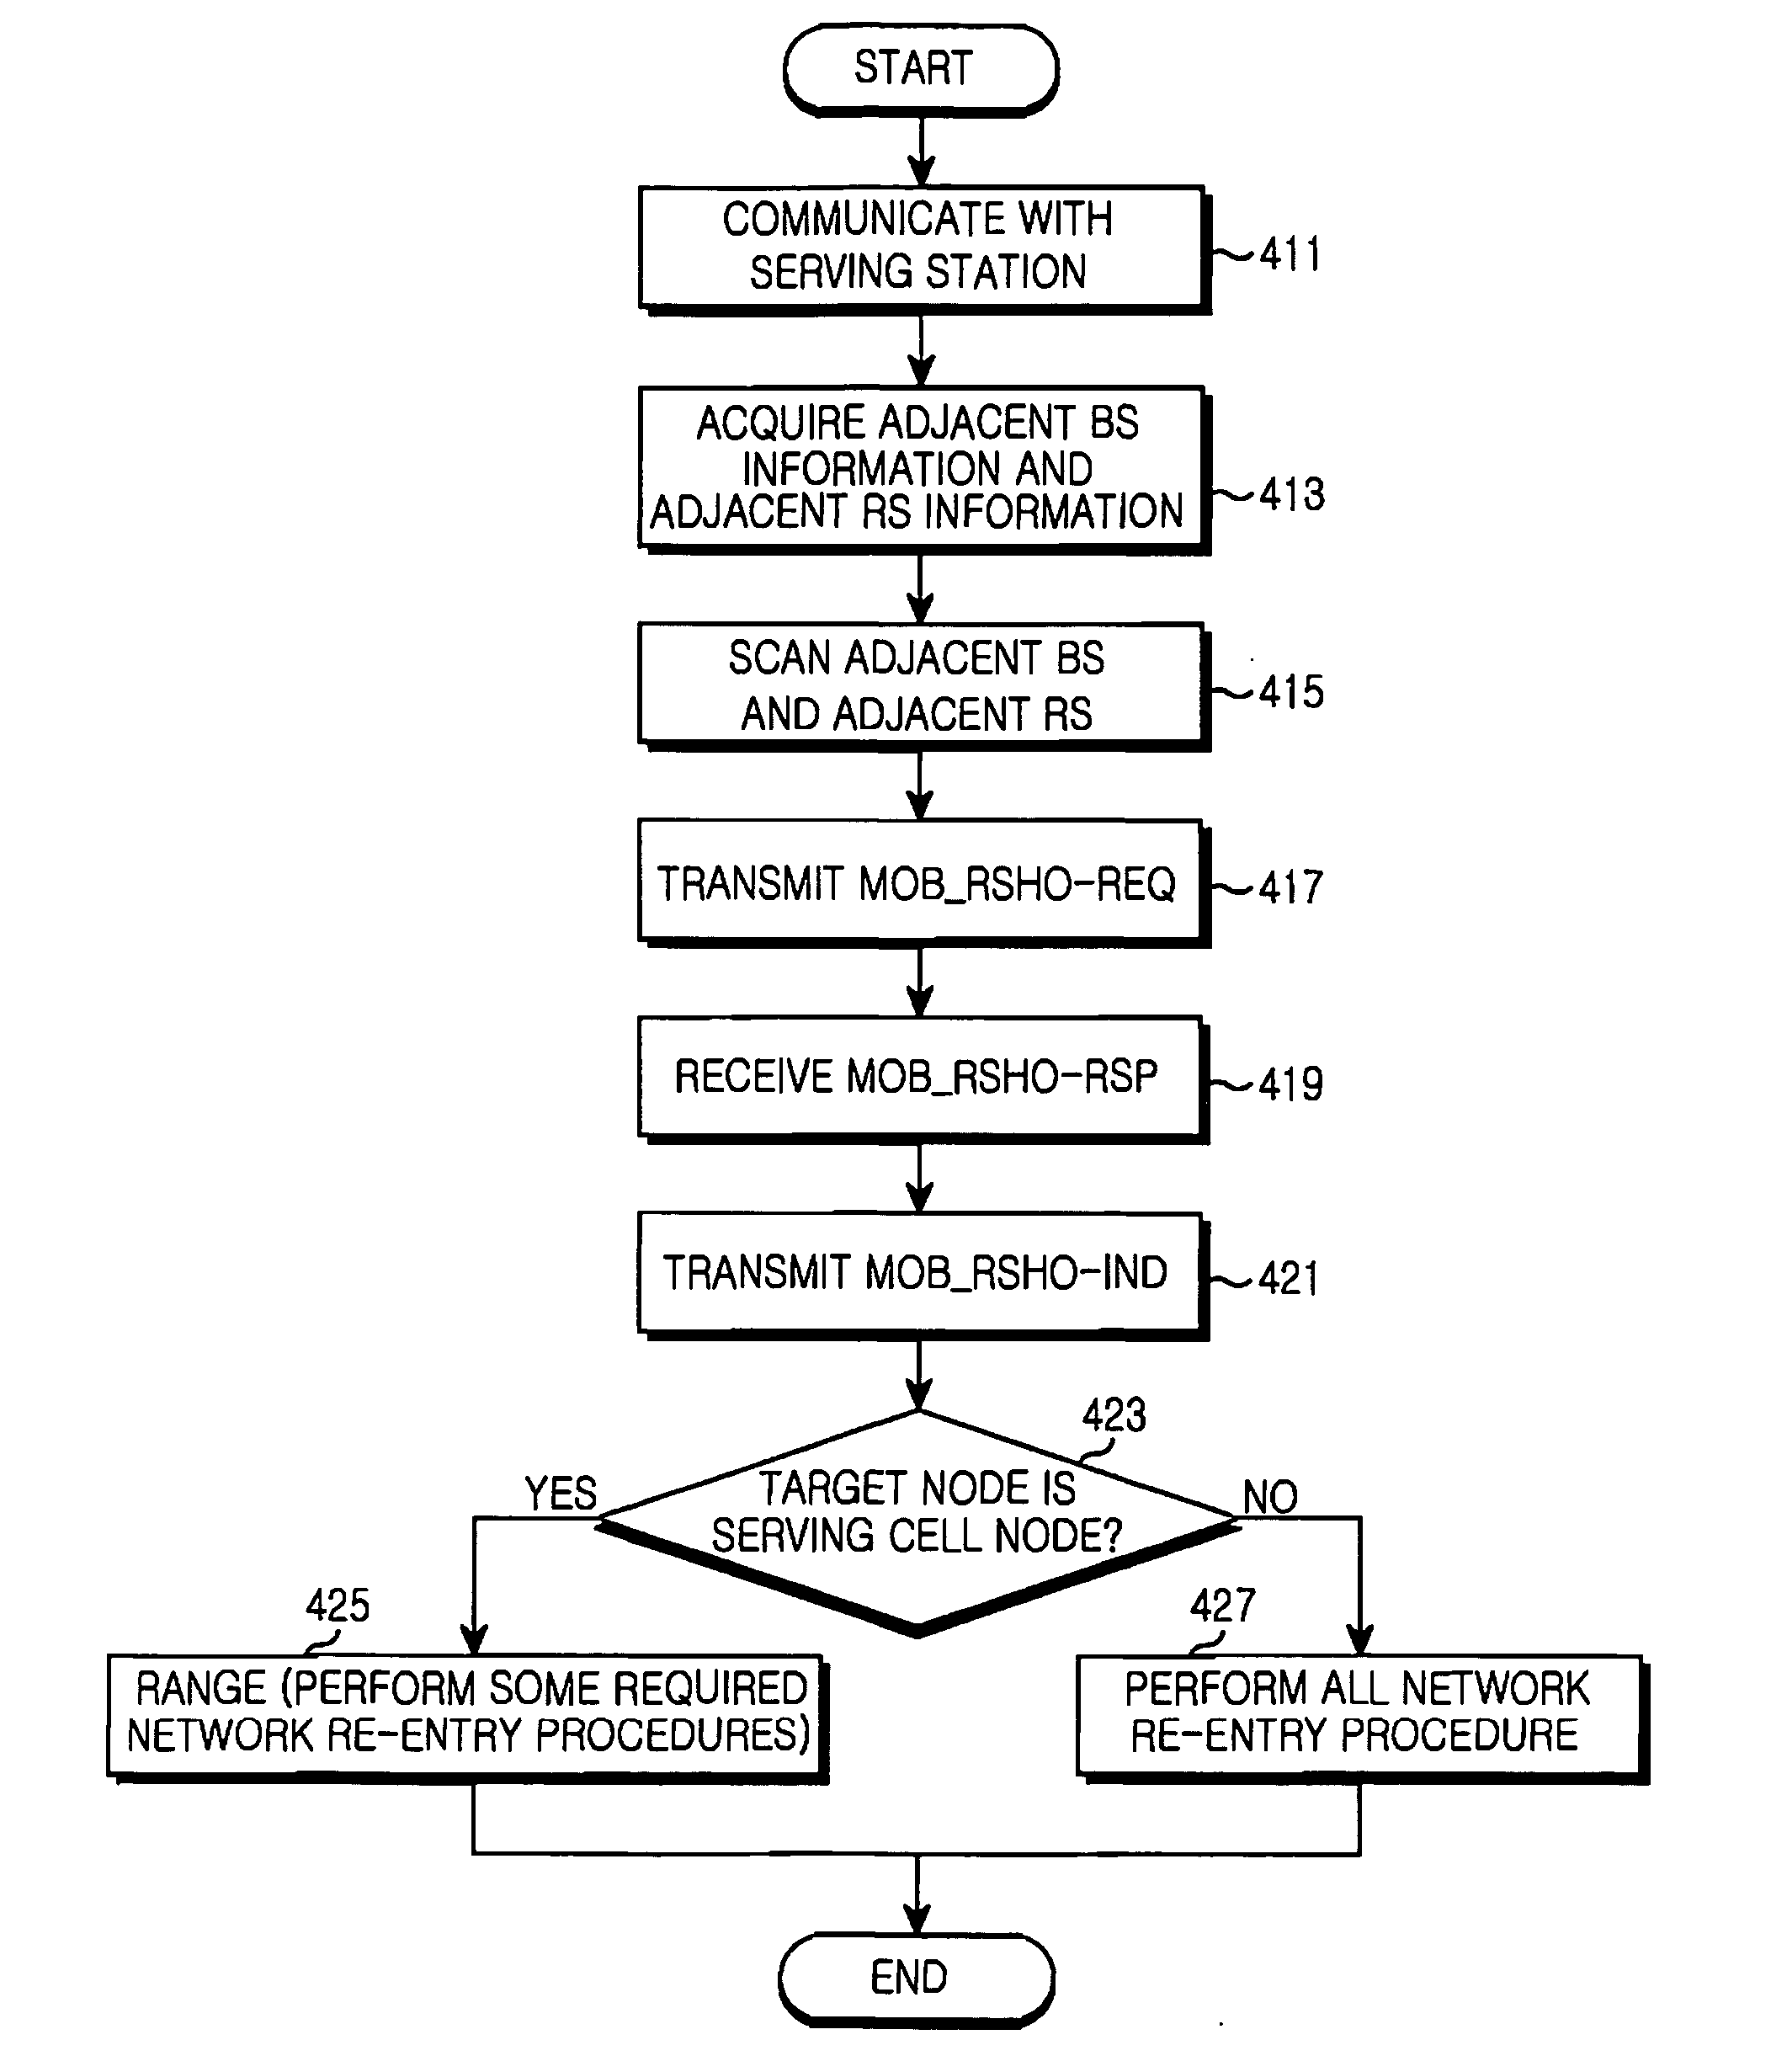 Apparatus and method of processing handover of a mobile relay station in broadband wireless access (BWA) communication system using multihop relay scheme